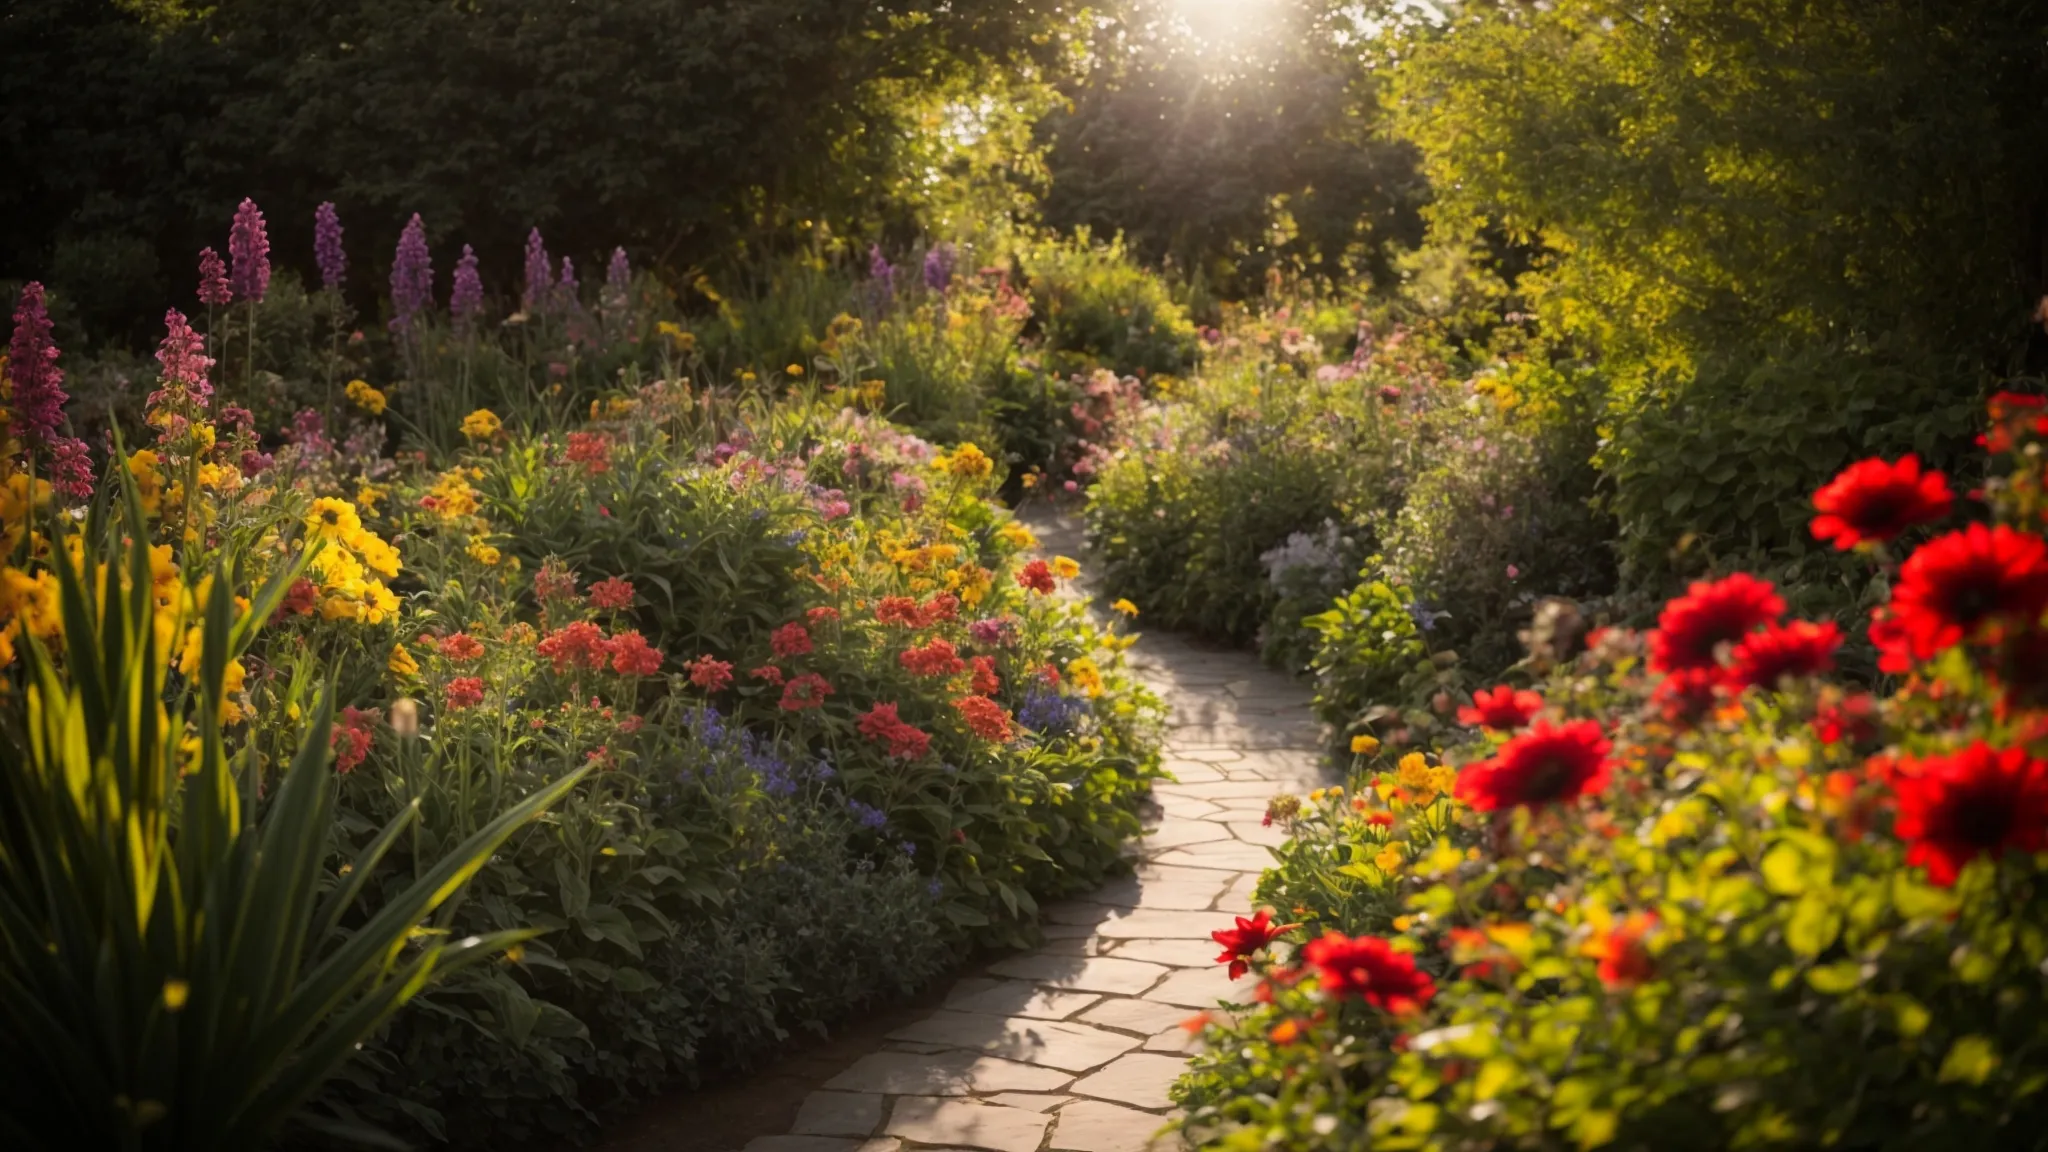 a vibrant garden scene with a visible path leading through various sections of flourishing plants and flowers under a bright sun.